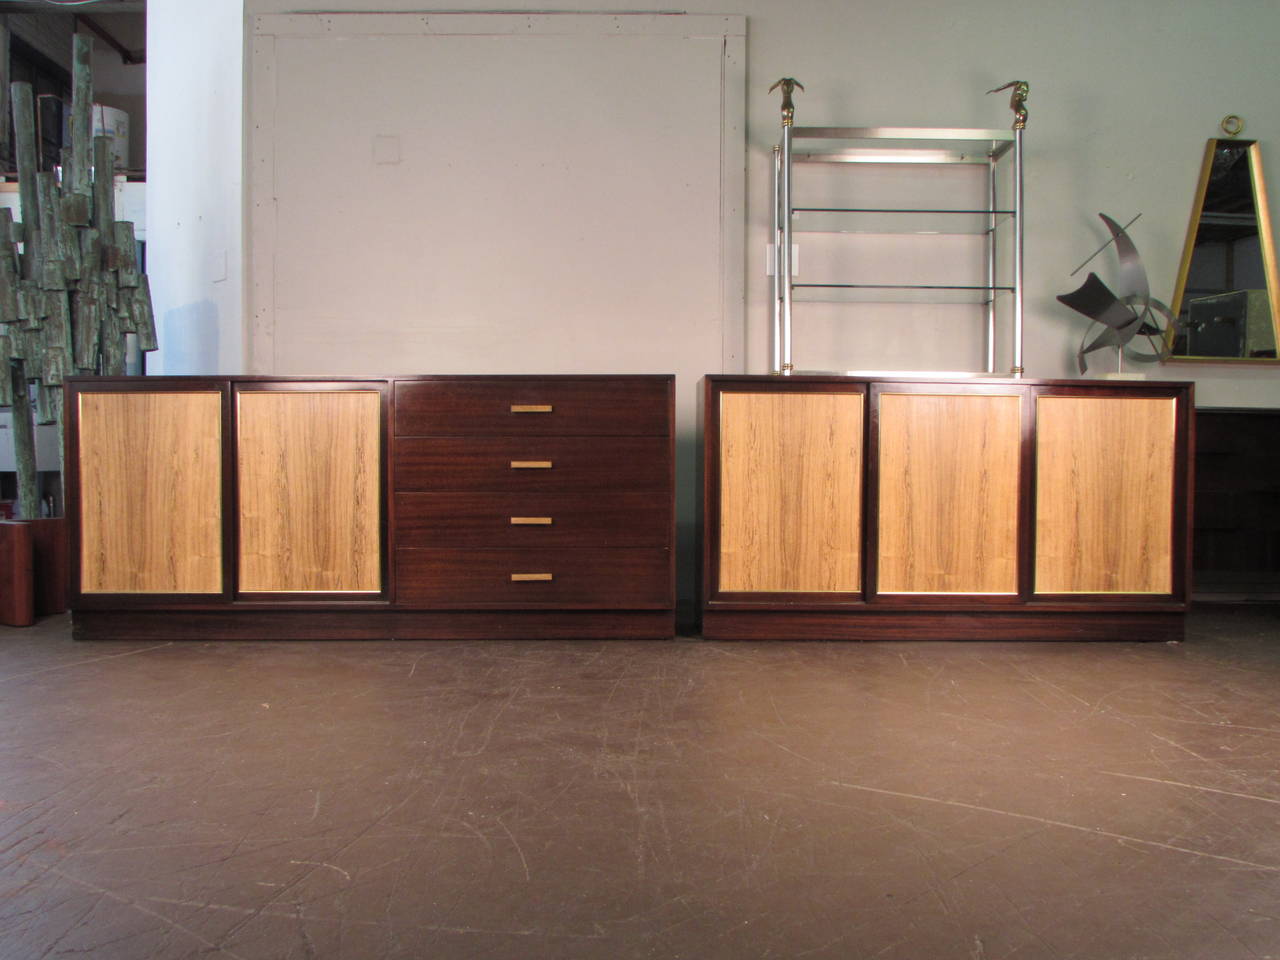 Absolutely gorgeous and rare pair of ribbon mahogany and bleached rosewood dressers or credenzas by Harvey Probber Studio, 1965. The handles are brass with a bleached rosewood detail. These chests were custom ordered by and built for the original